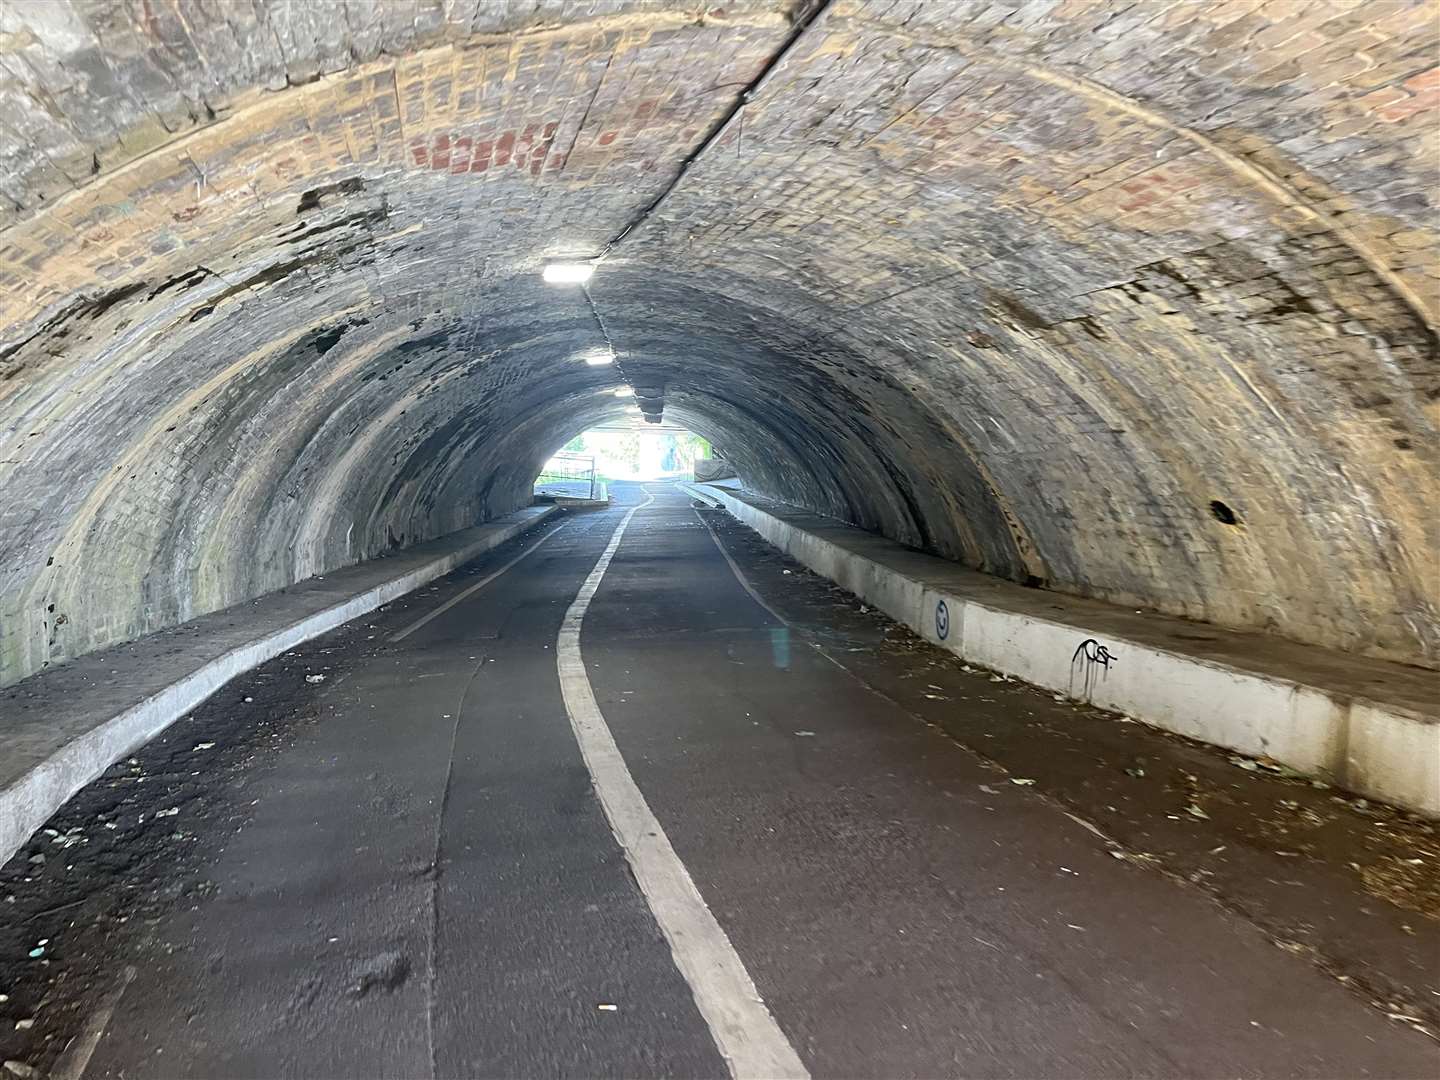 Cyclists and pedestrians can both use the underpass